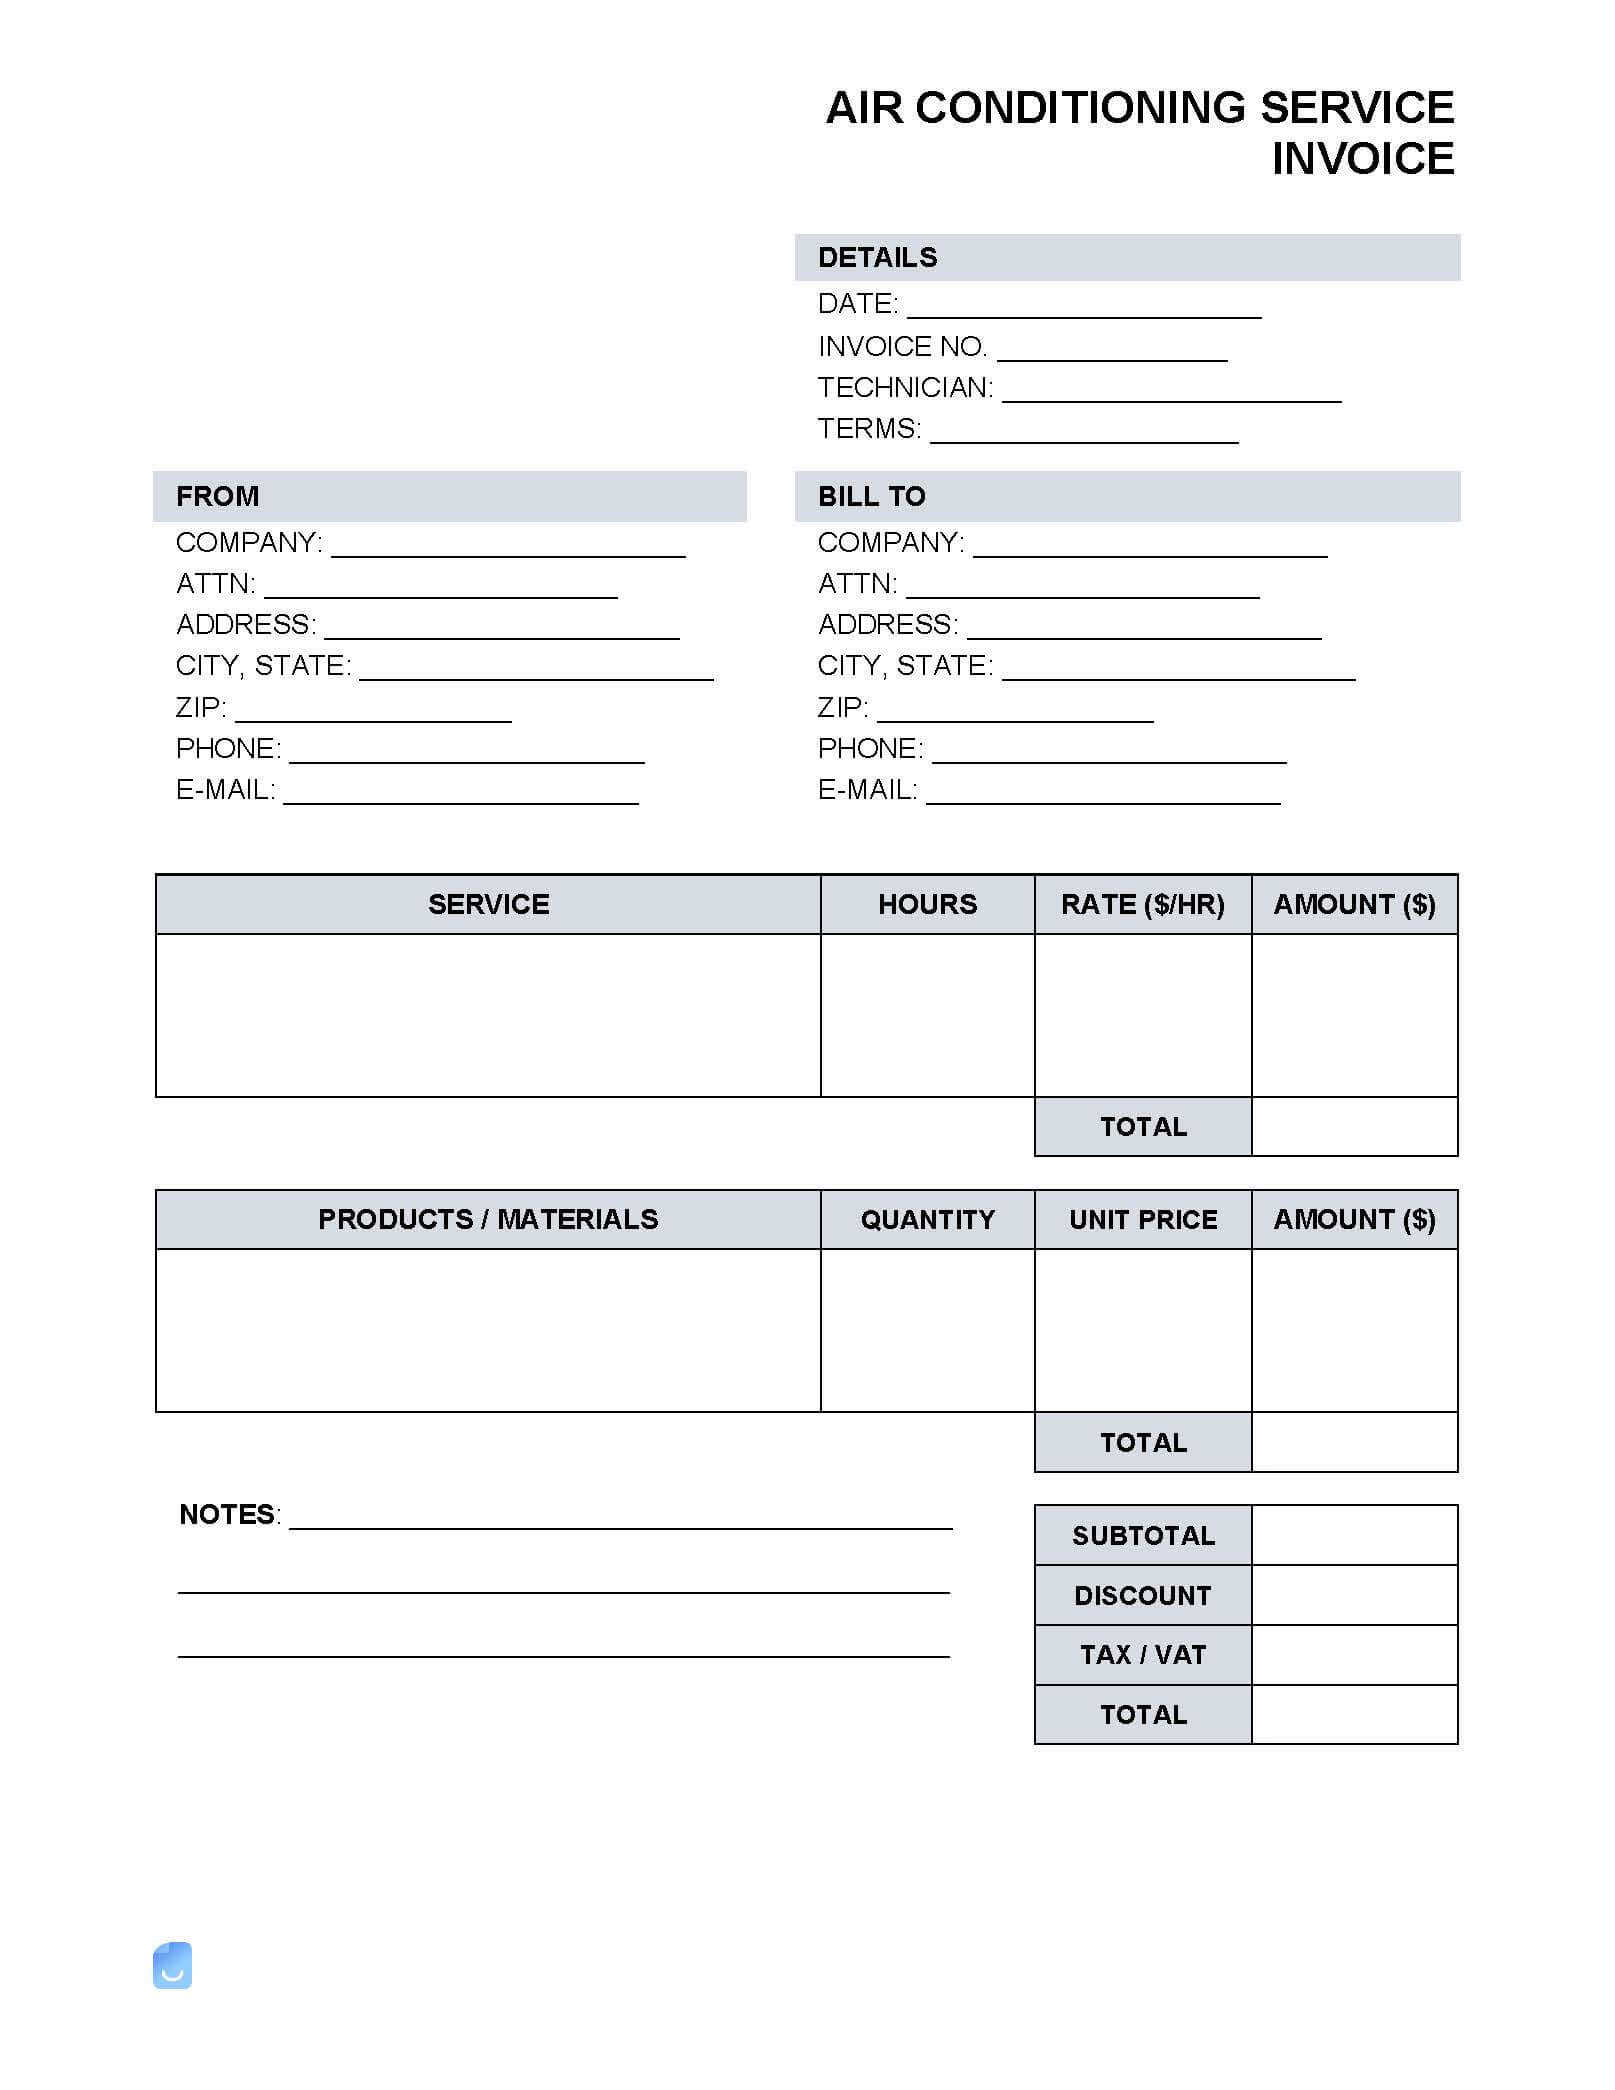 Air Conditioning Service Invoice Template | Invoice Maker Regarding Air Conditioning Invoice Template